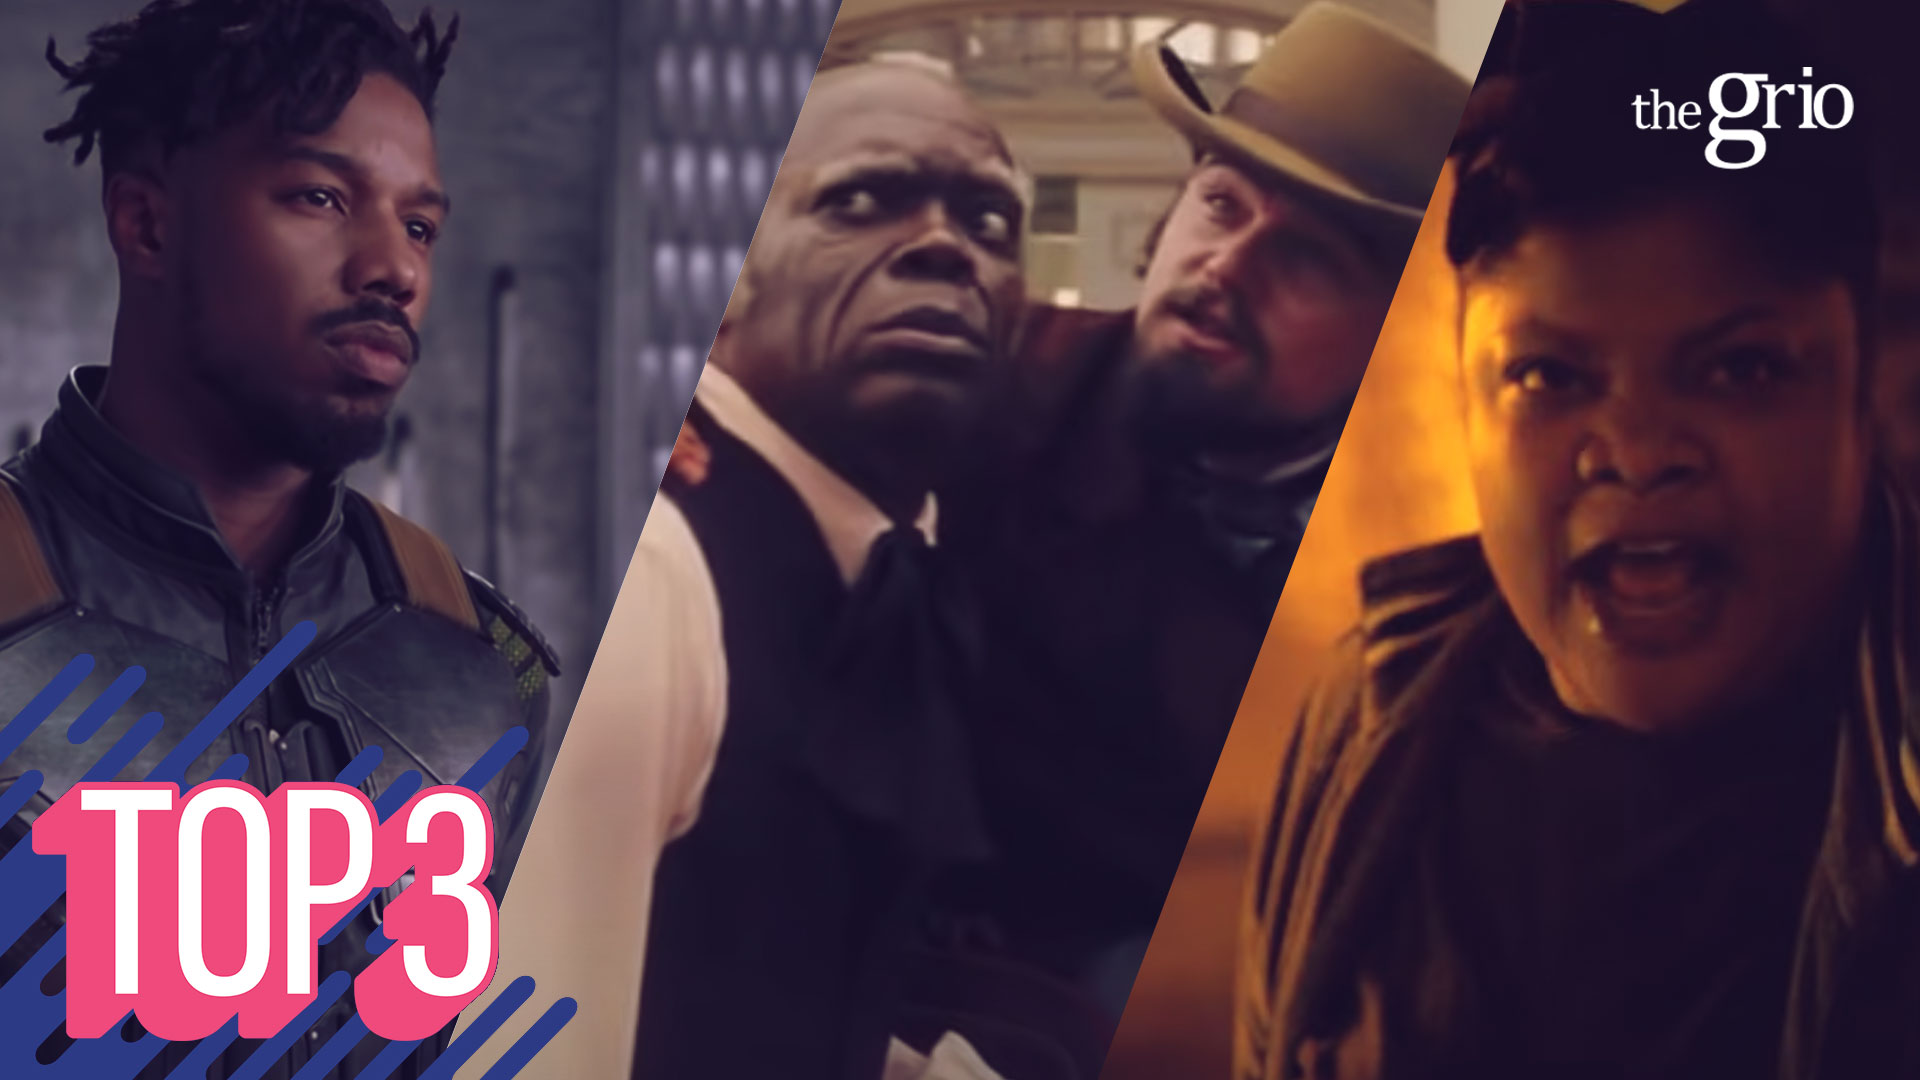 Watch: Grio Top 3 | Who are the Top 3 Black villains in a film?